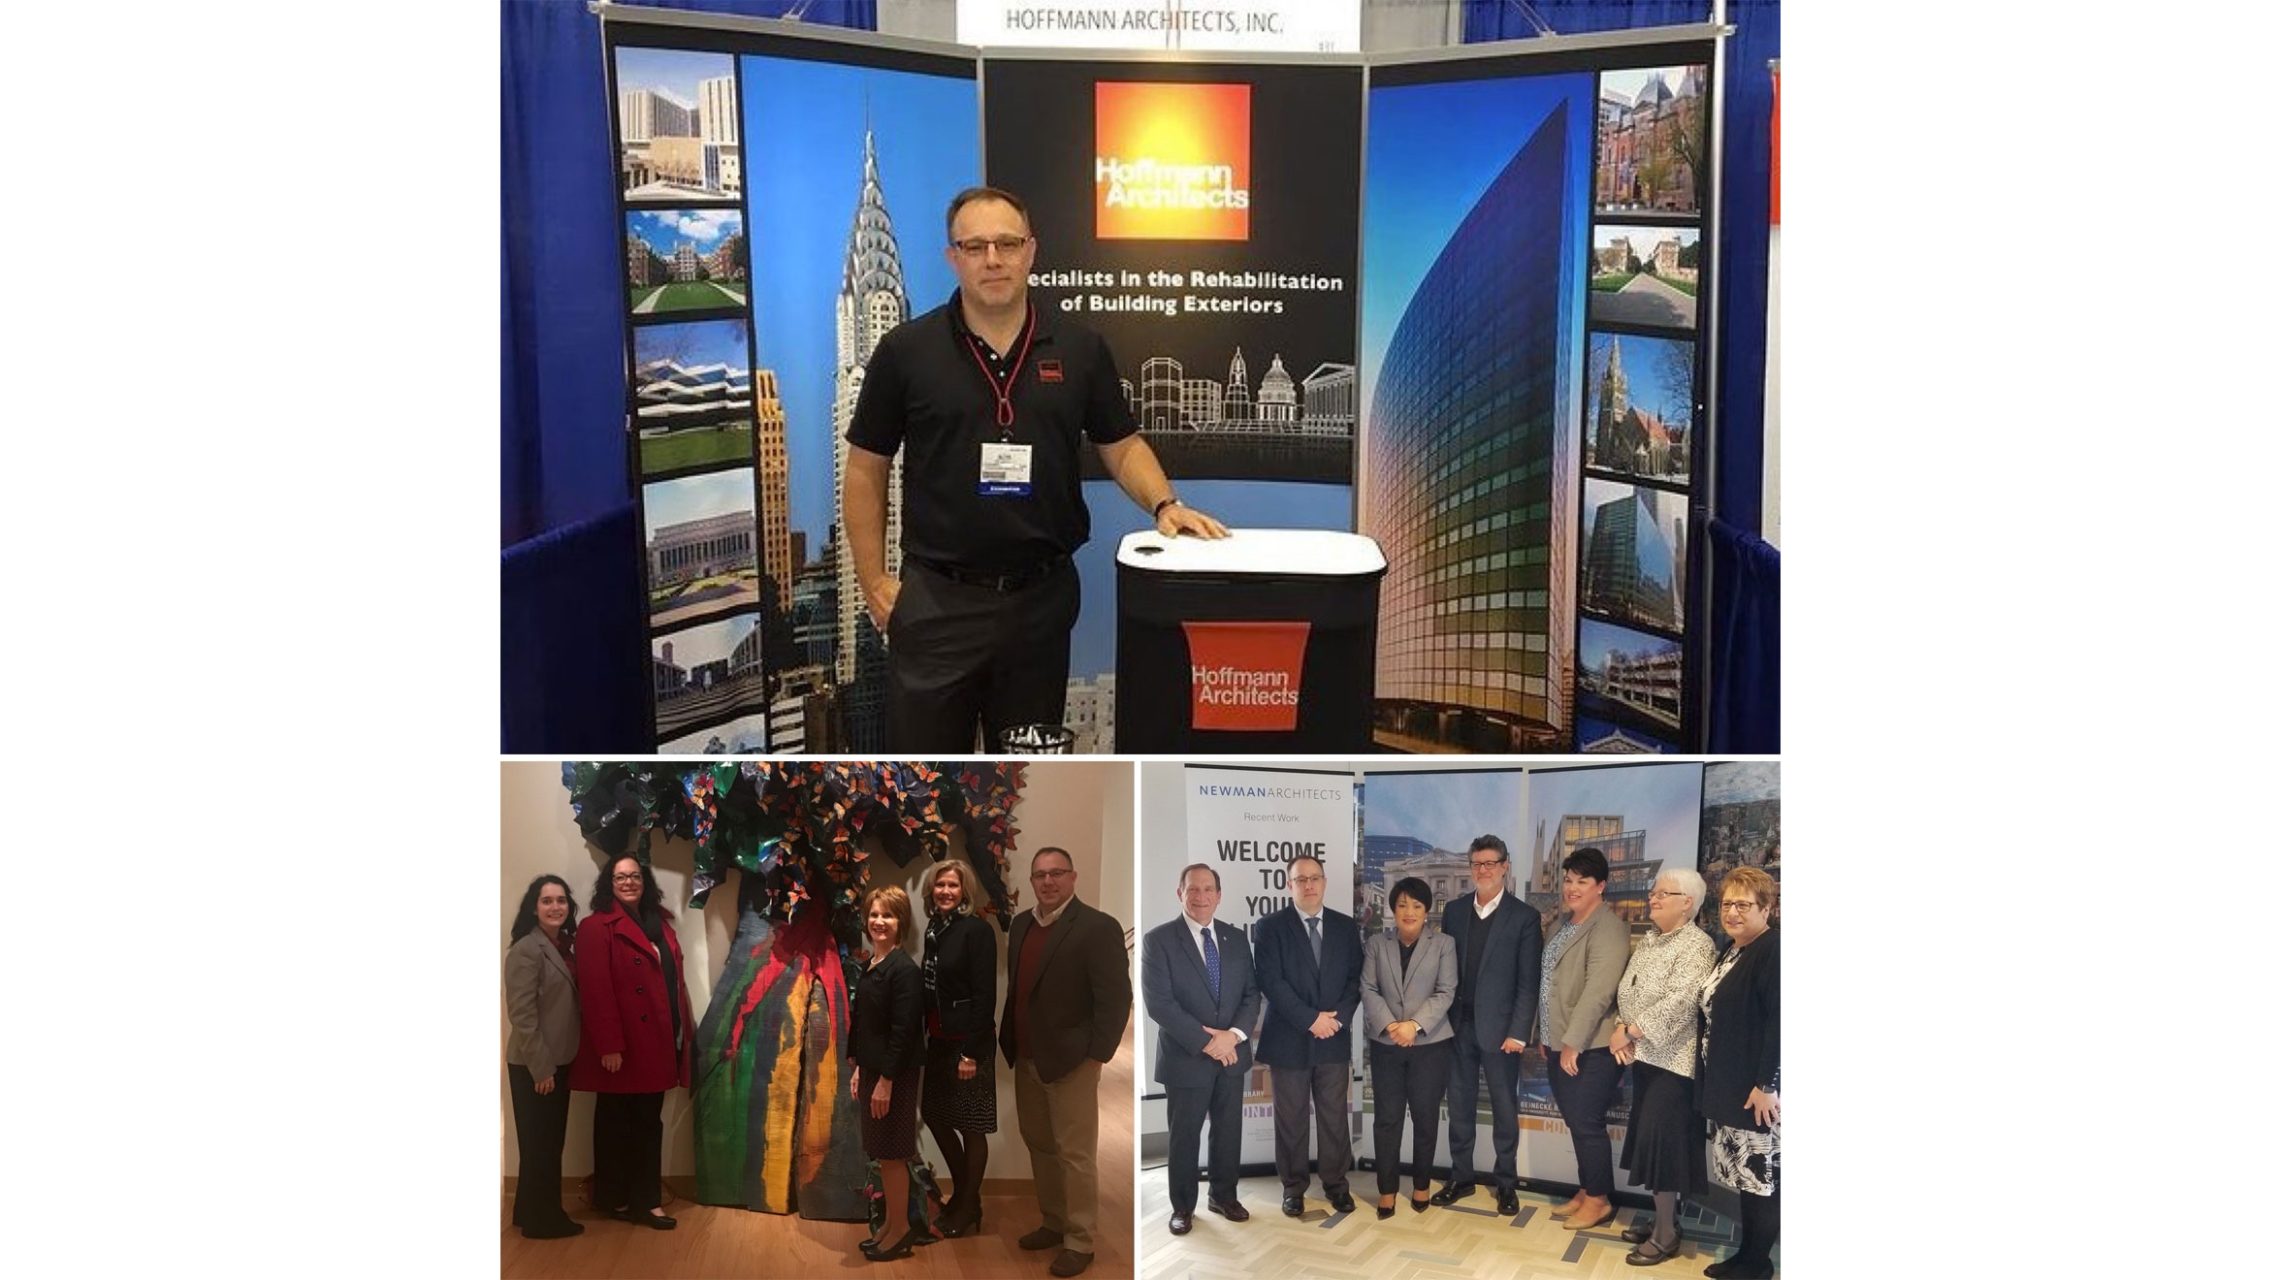 Robert G. Delagrange, Senior Business Development Manager, attending the Northeast Buildings and Facilities Management Conference [top], the Connecticut Building Congress Project Team Awards [bottom left], and the American Institute of Architects (AIA) Connecticut Architecture Week [bottom right].